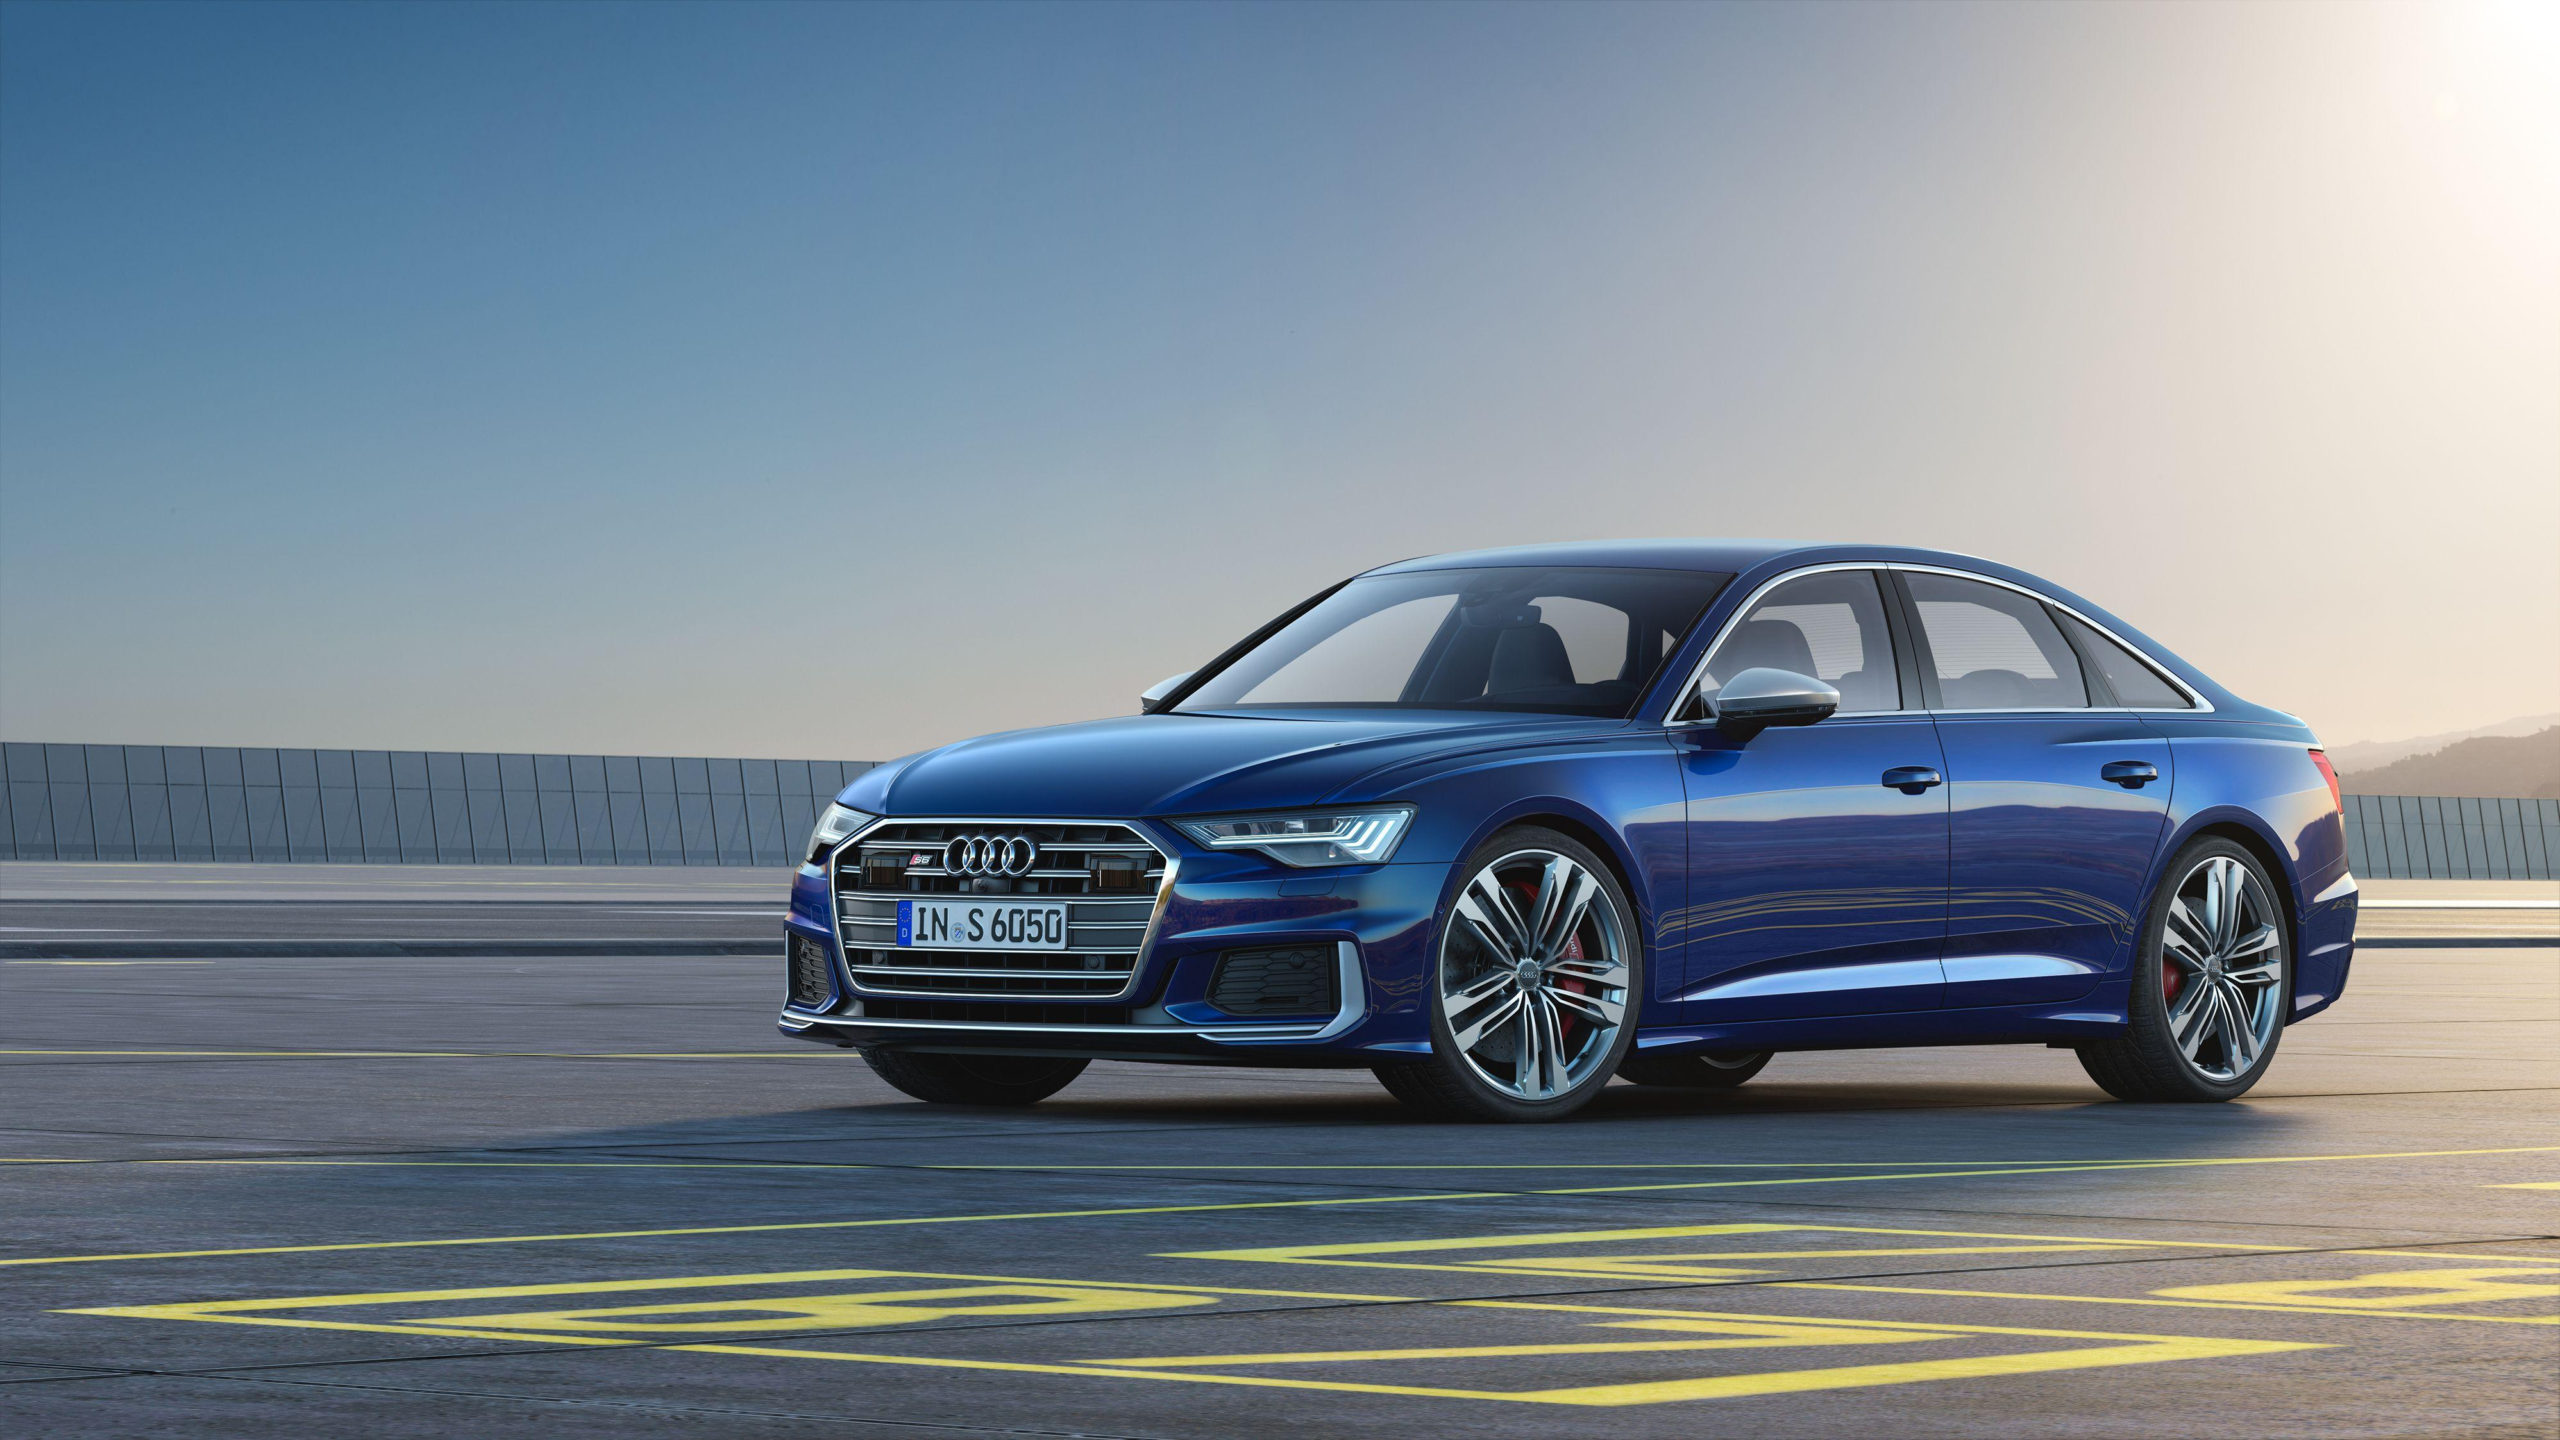 2022 Audi S6 1/4 Mile Price, Towing Capacity, Safety ...